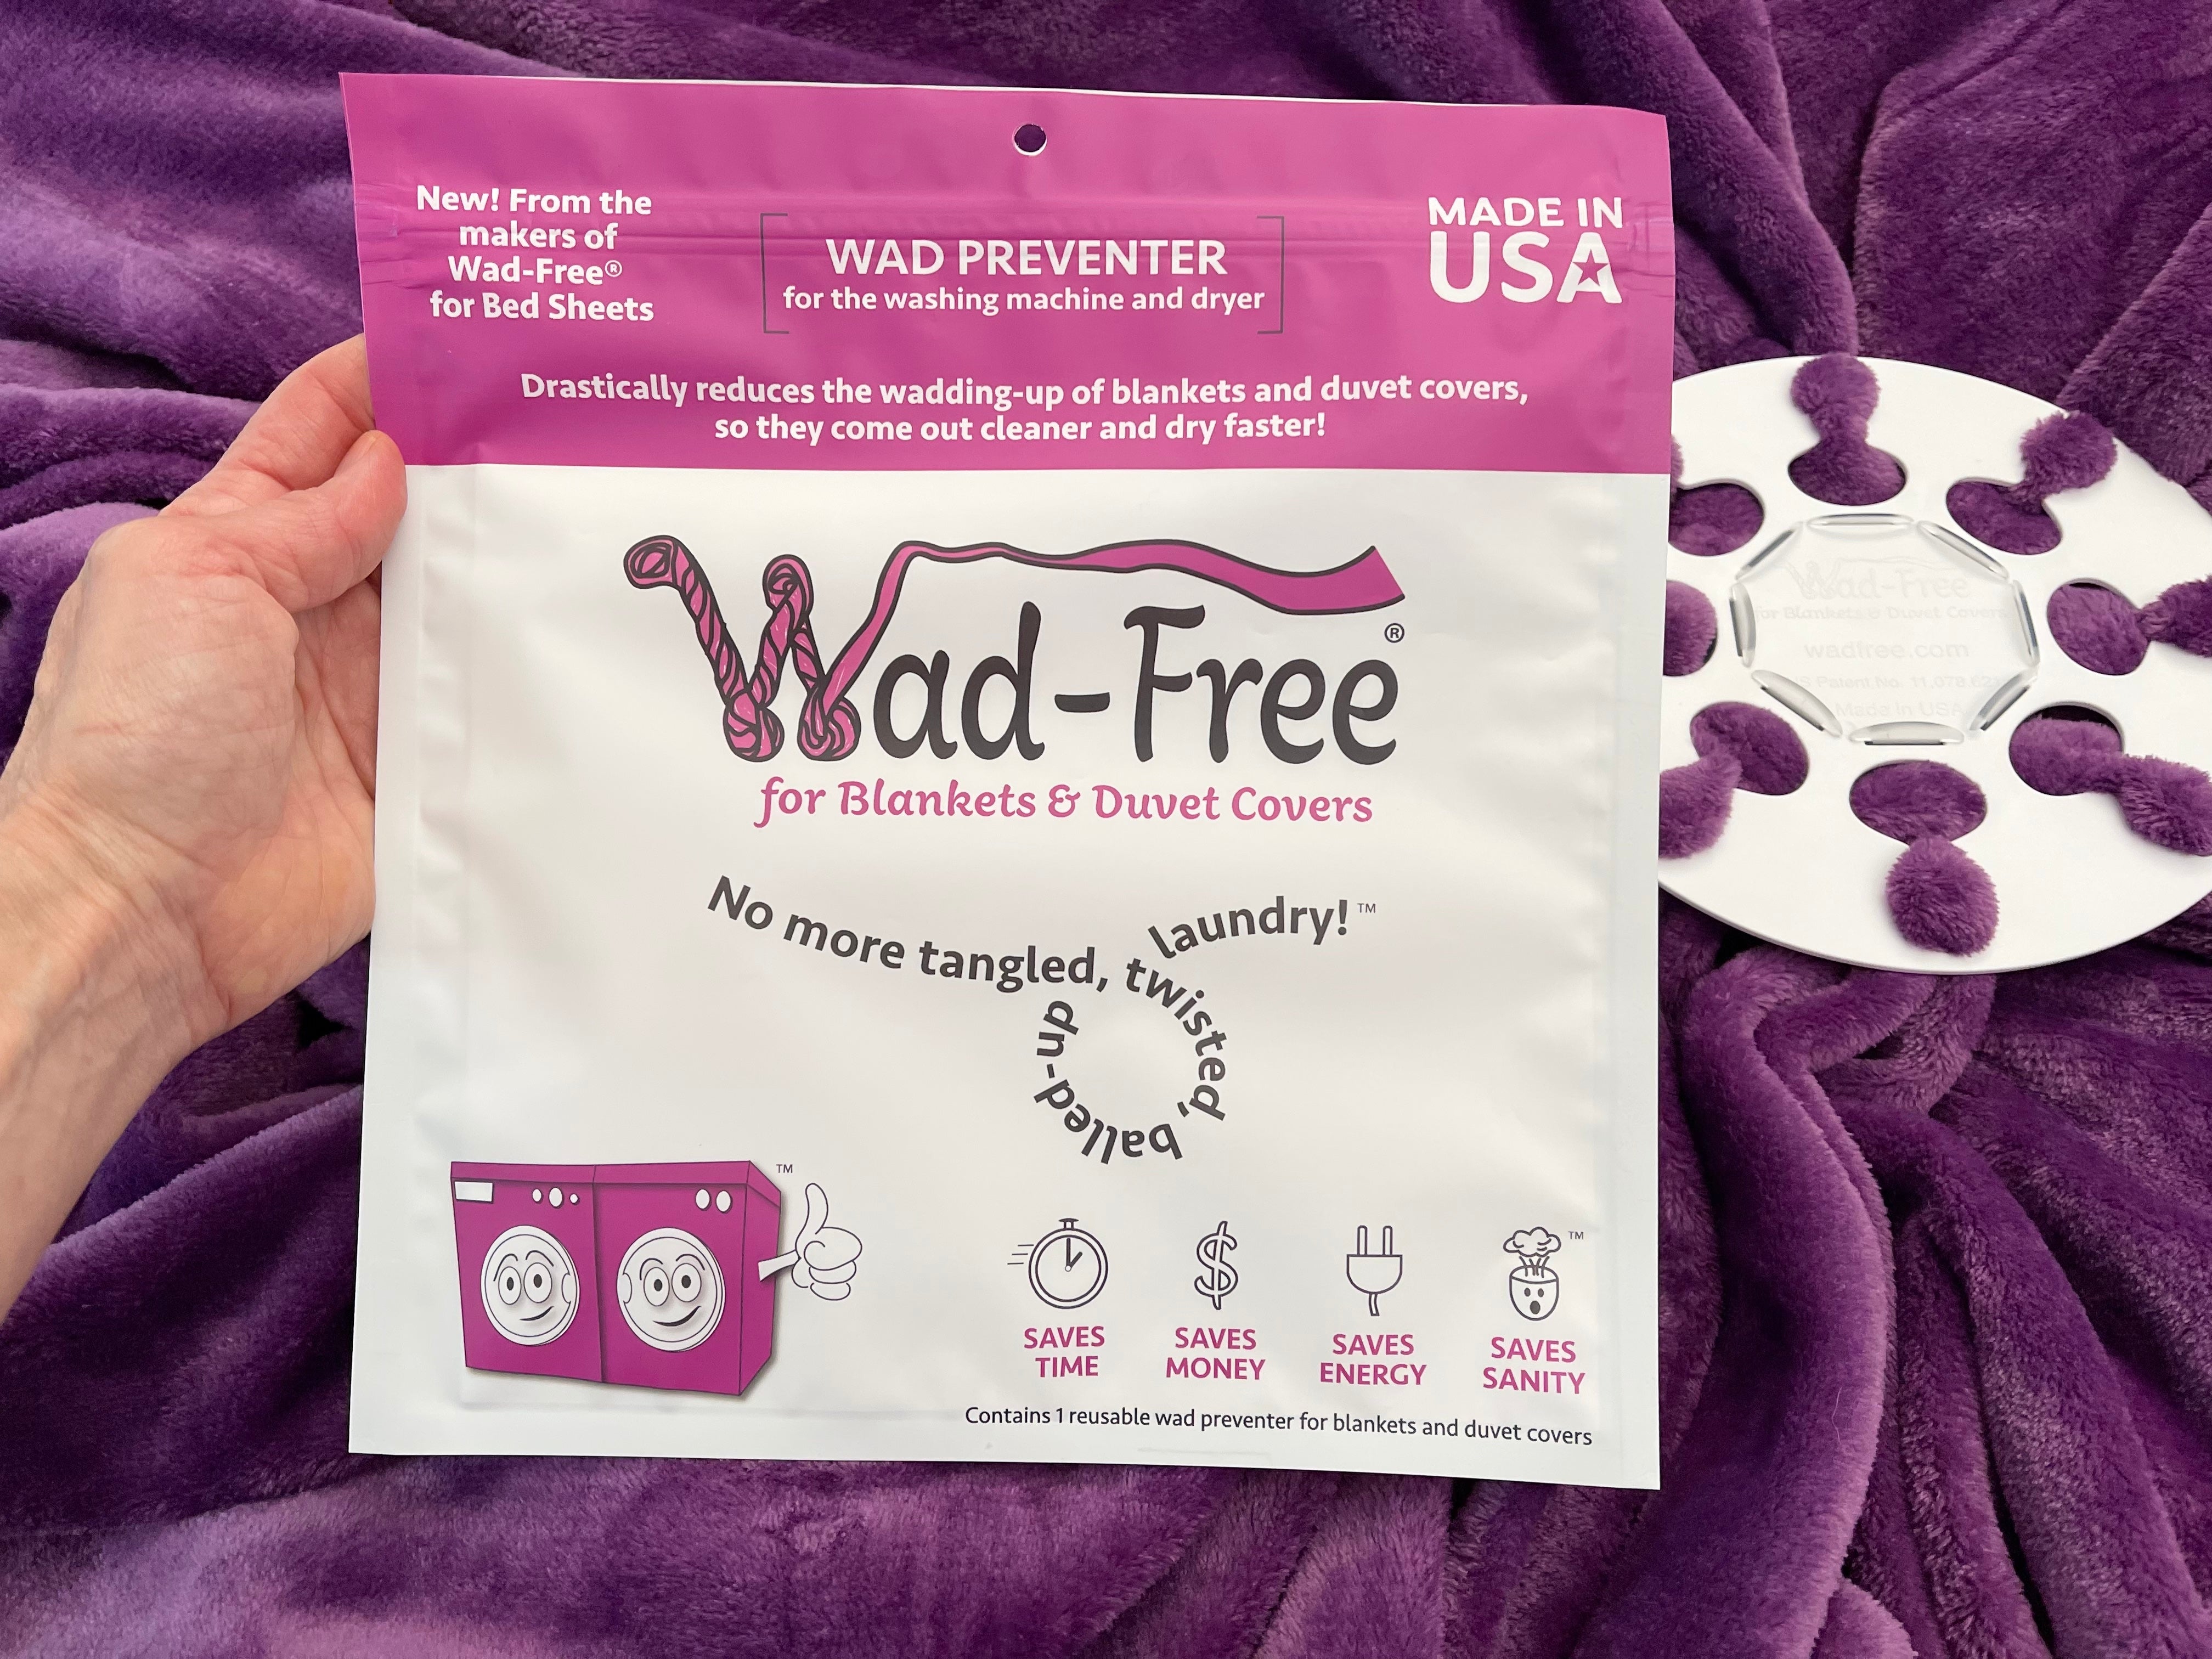 Announcing Wad-Free® for Blankets & Duvet Covers - The heavy-duty